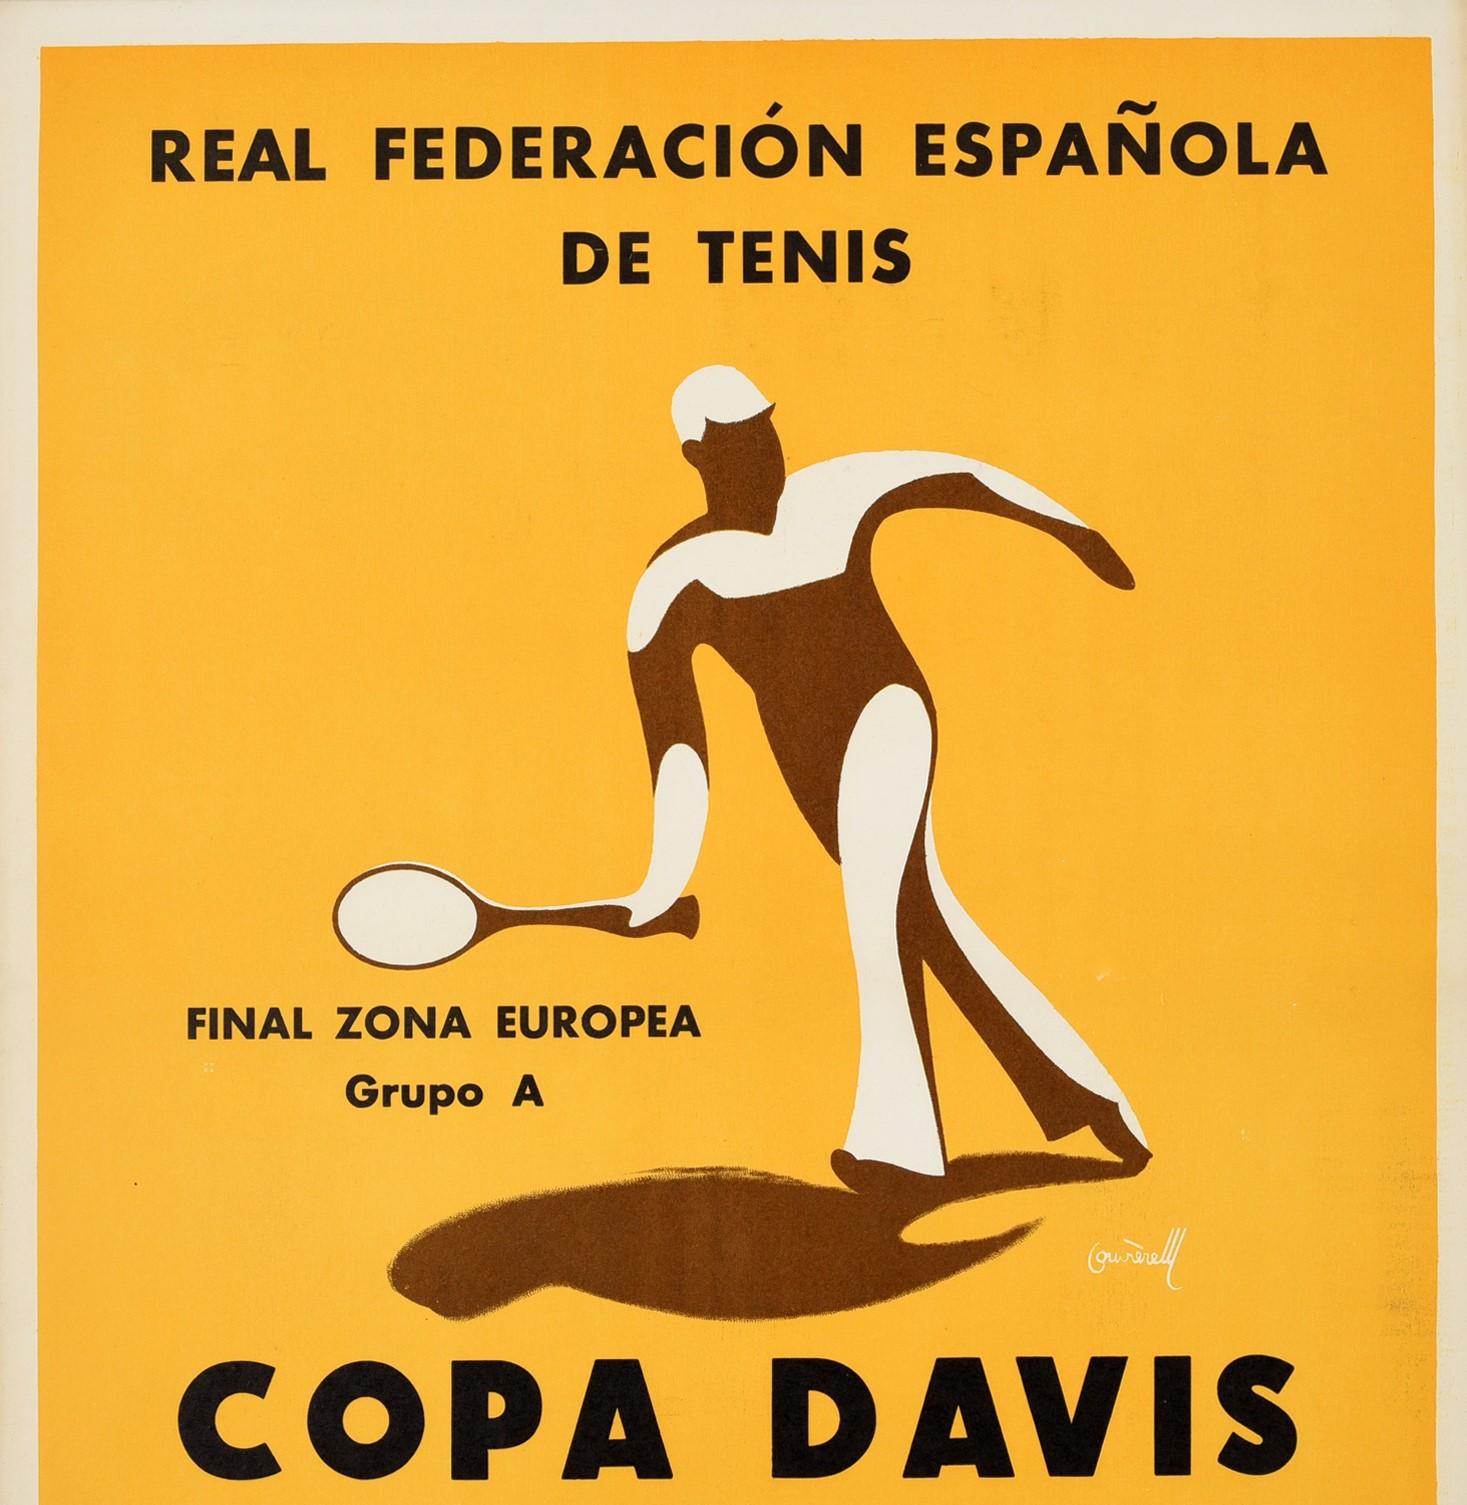 Original vintage sport poster for the 1967 Davis Cup Group A final match between the USSR and Spain on 14, 15 and 16 July in Barcelona featuring a great graphic design depicting a stylised image of a tennis player striding forward with his tennis